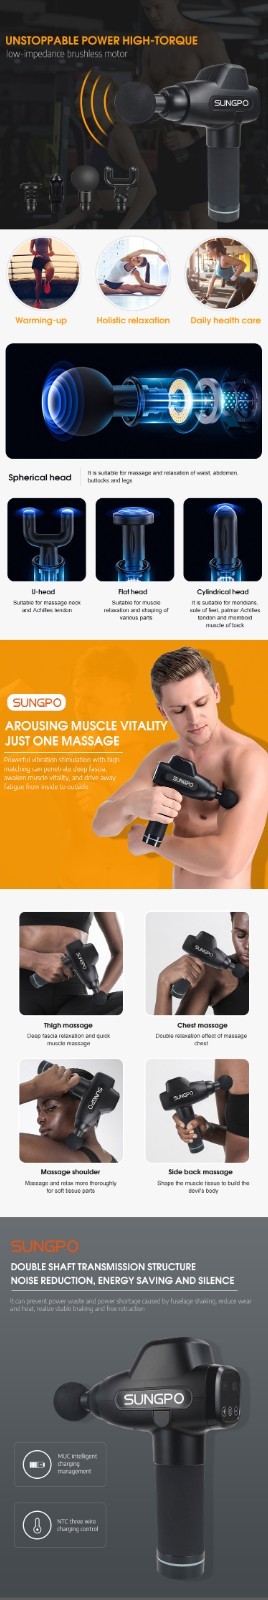 SUNGPO popular power massagers with good price for muscle recovery